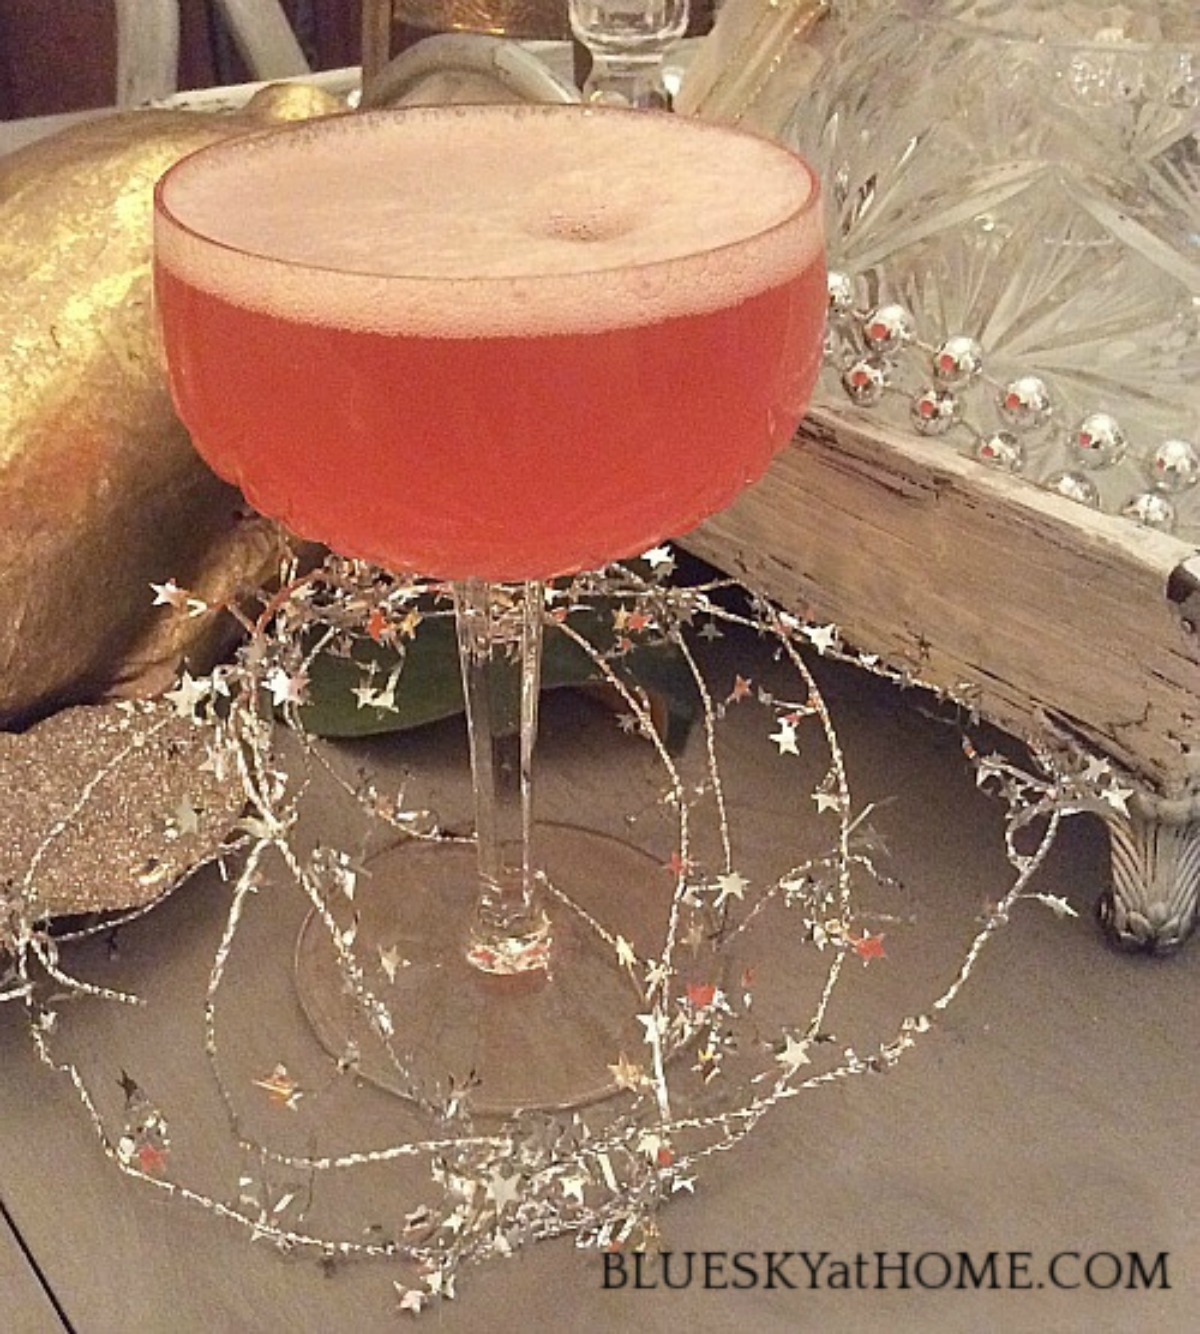 Champagne cocktails